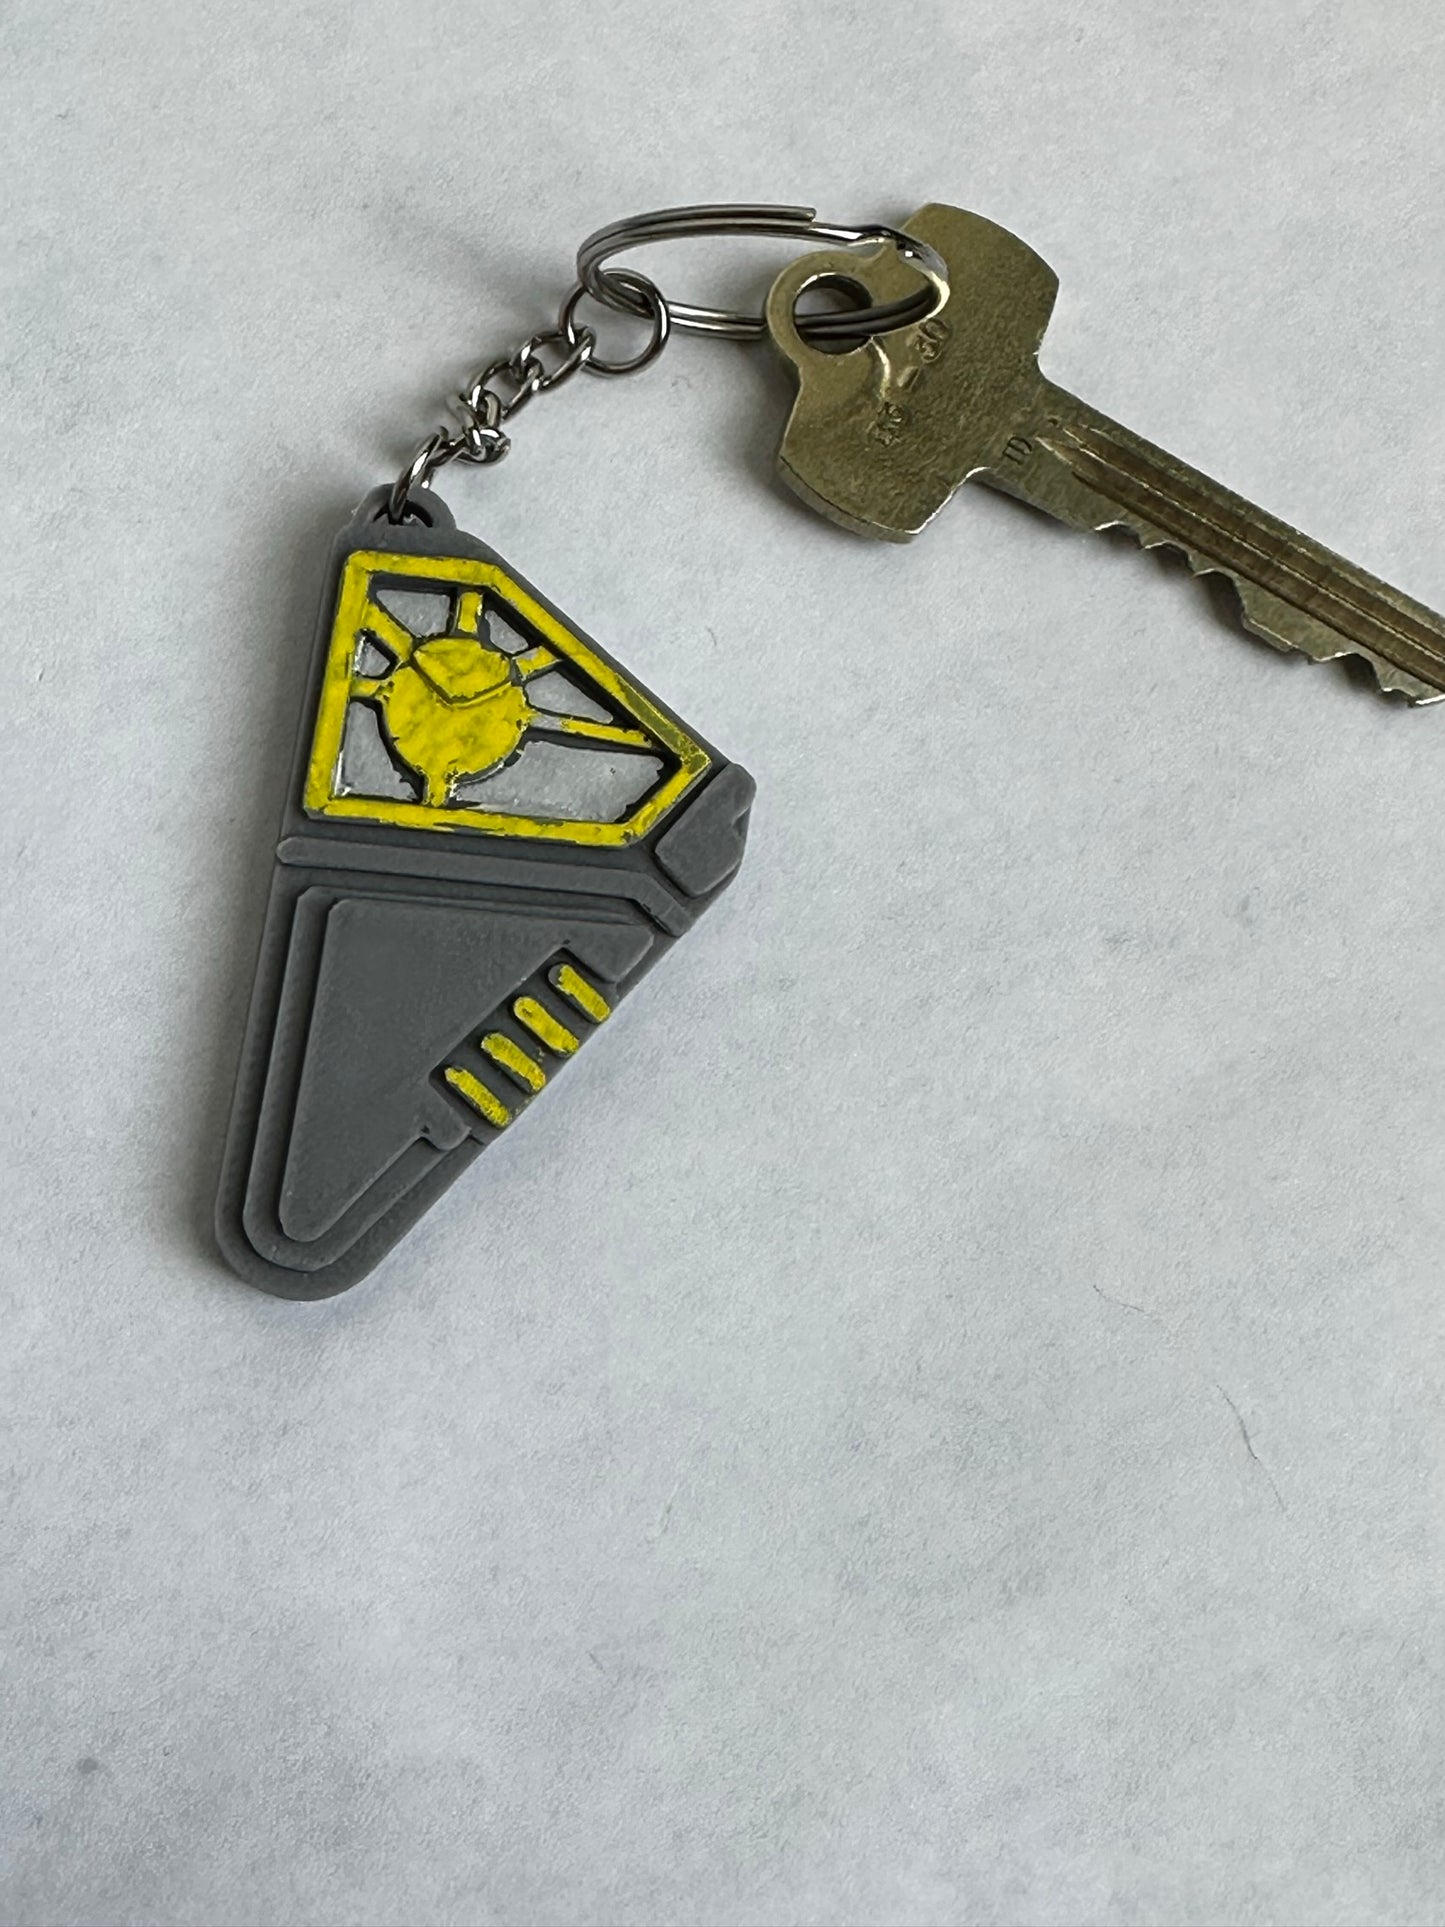 Personalized Starlord Badge Keychain and Bag Tag from Guardians of the Galaxy